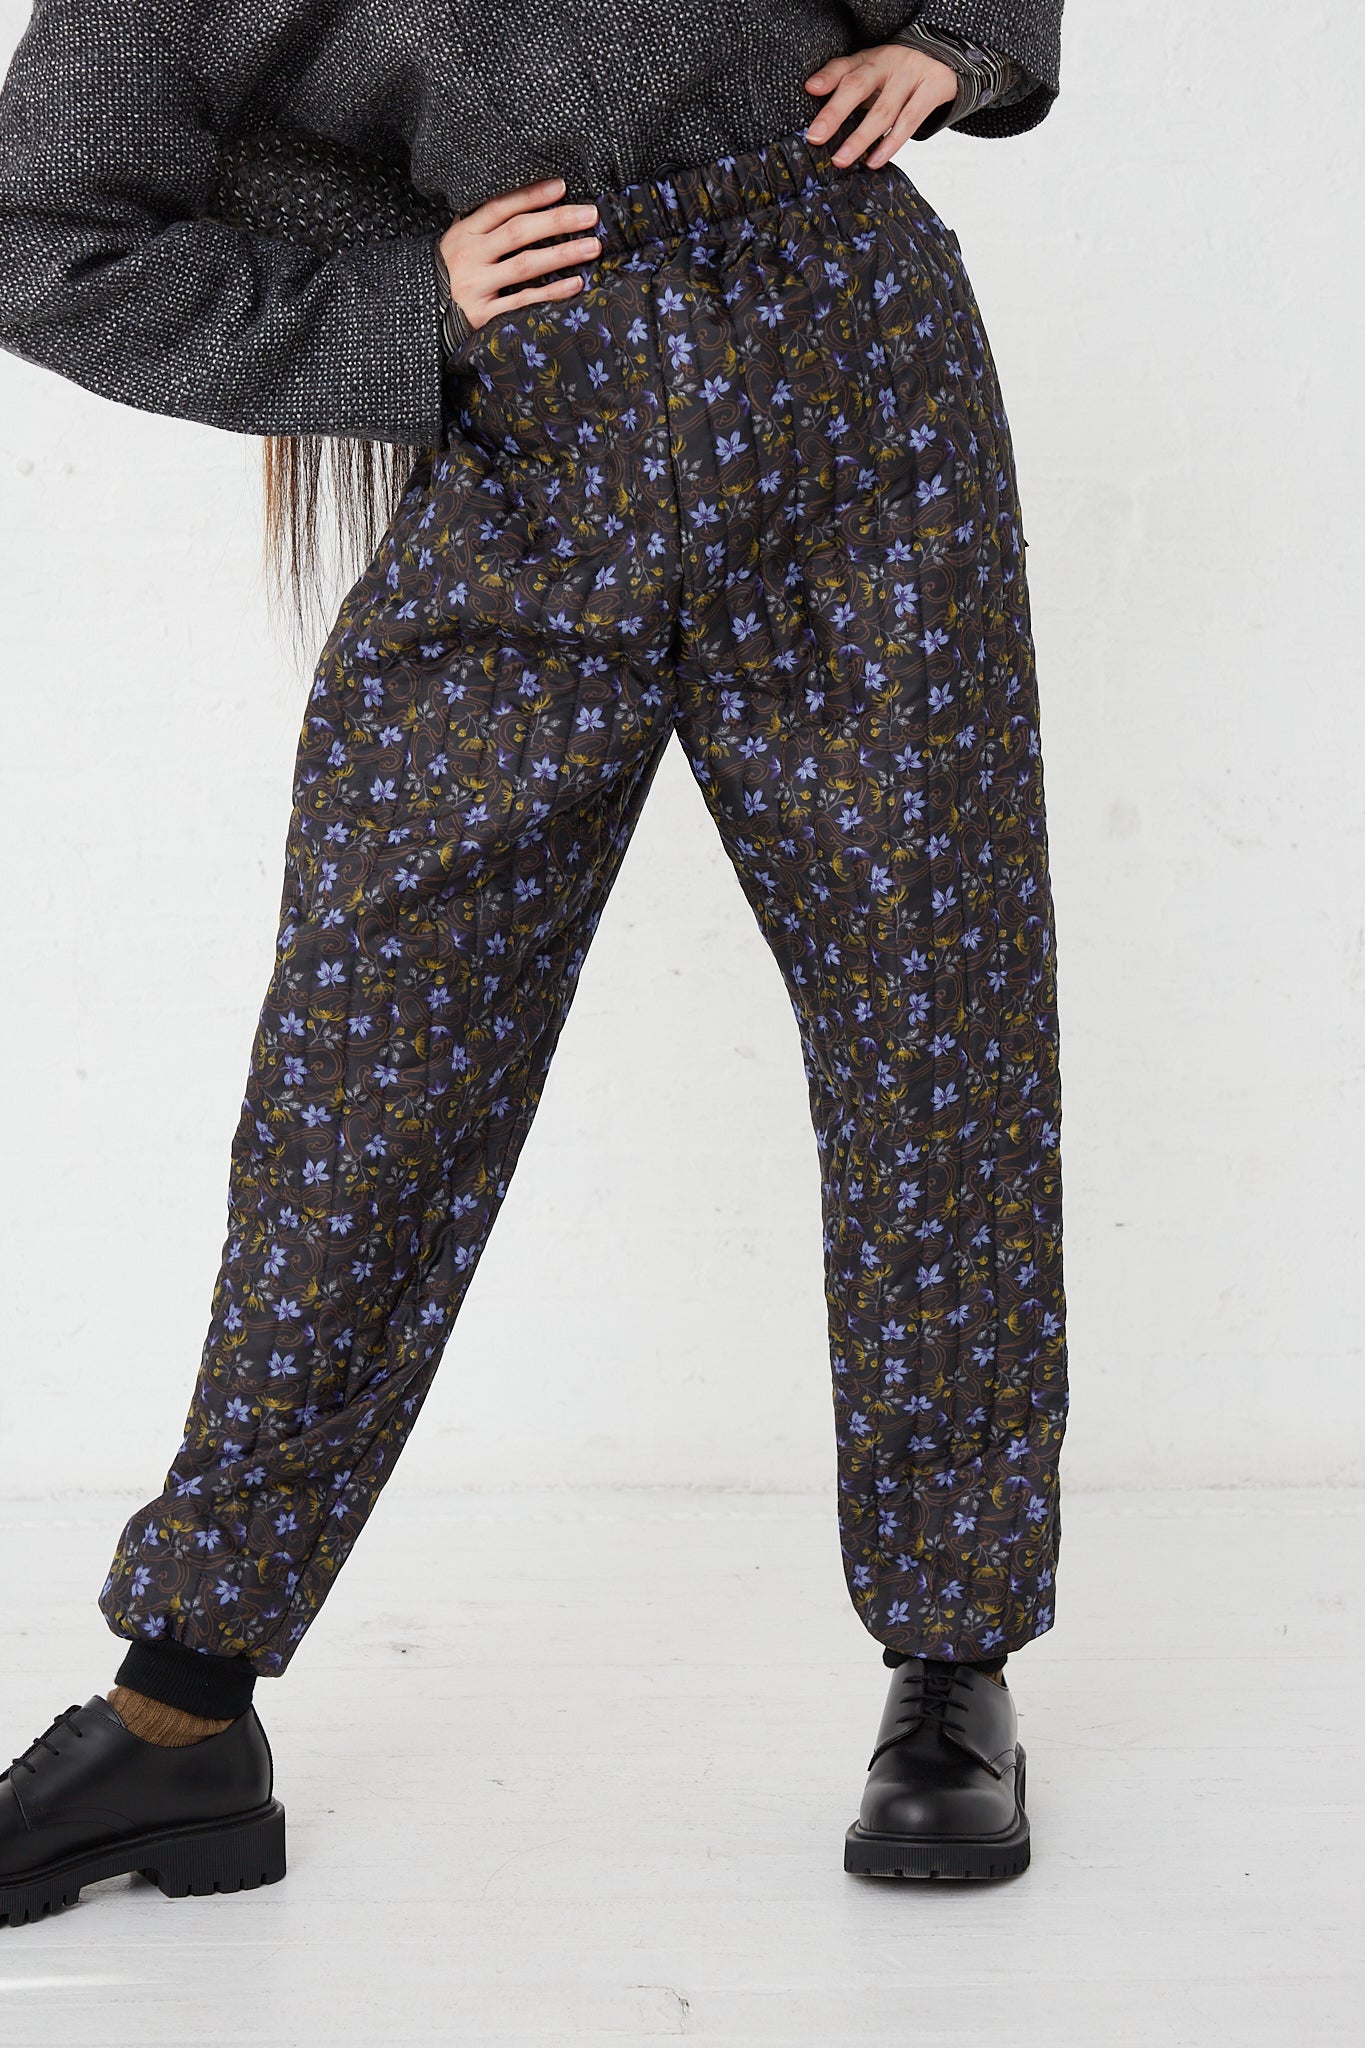 A woman wearing the Bless Monpe Pant No. 08 in Floral Print A - S with an elasticated waist.